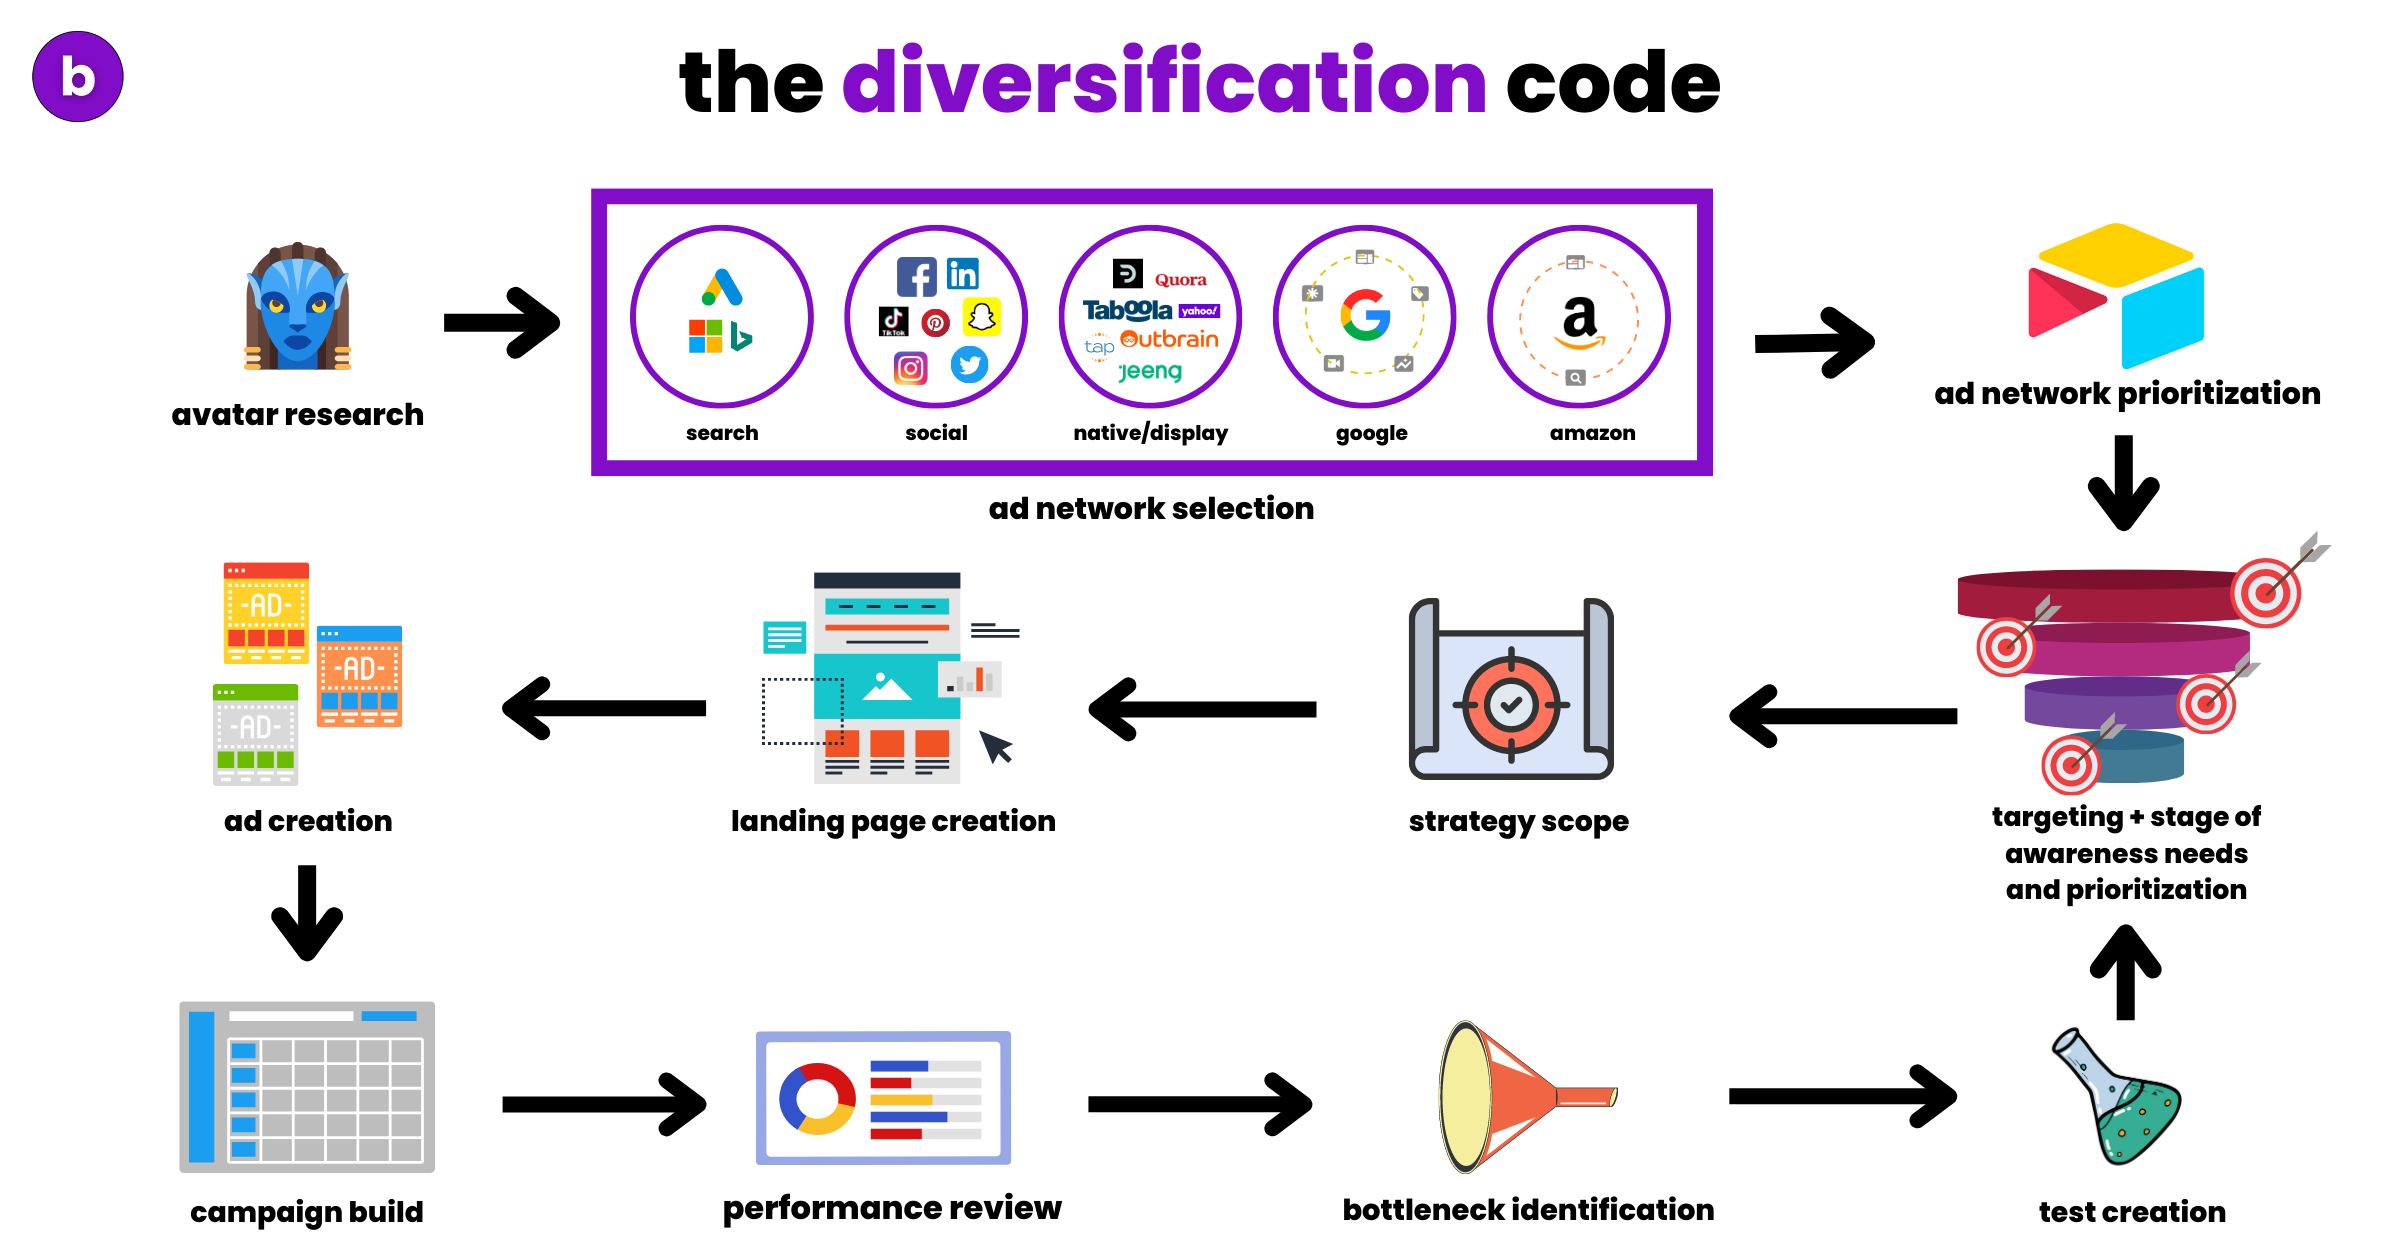 the diversification code by berp.io